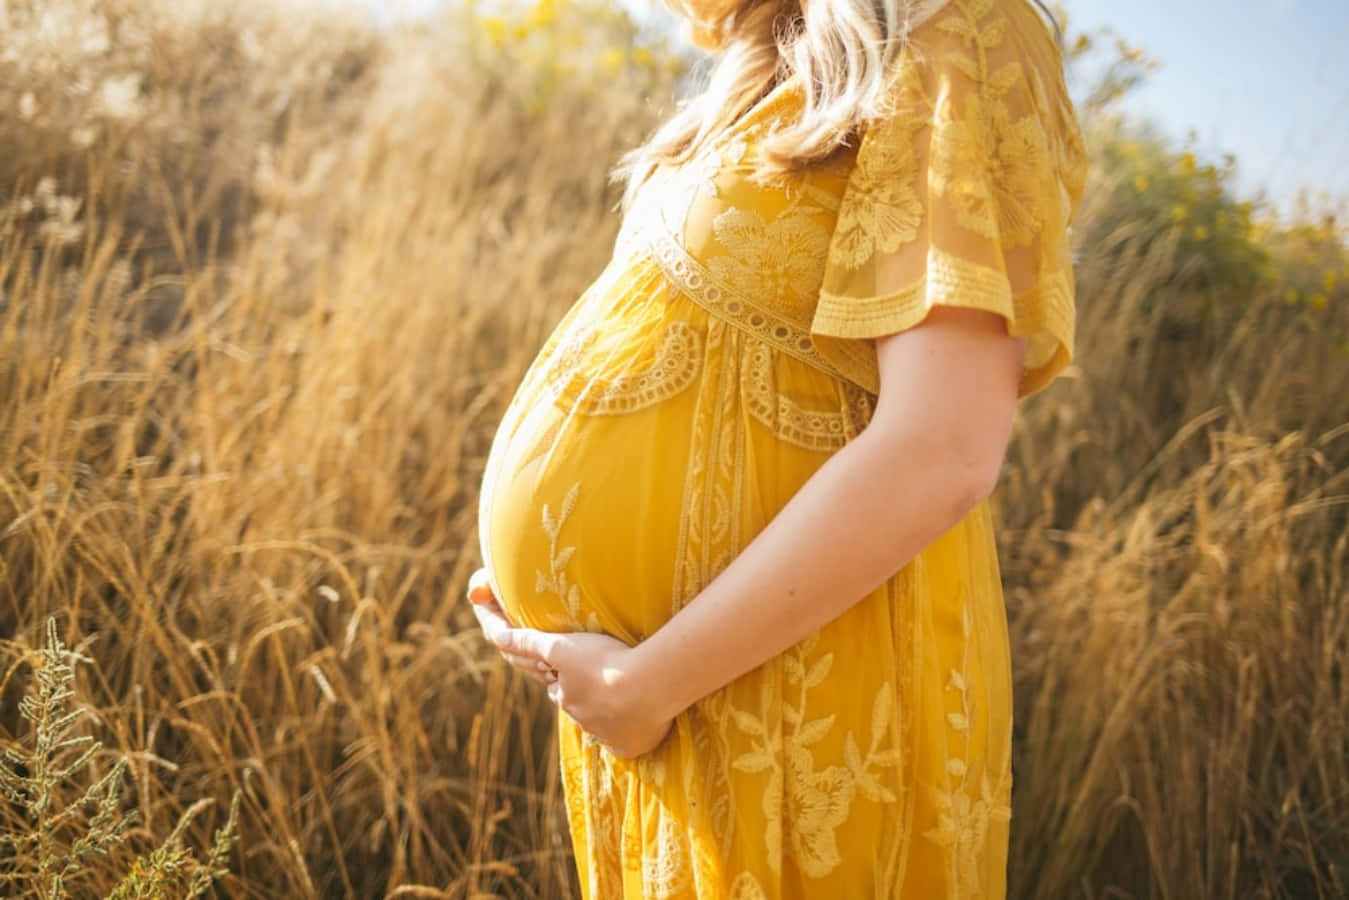 A Pregnant Woman In A Yellow Dress Standing In A Field